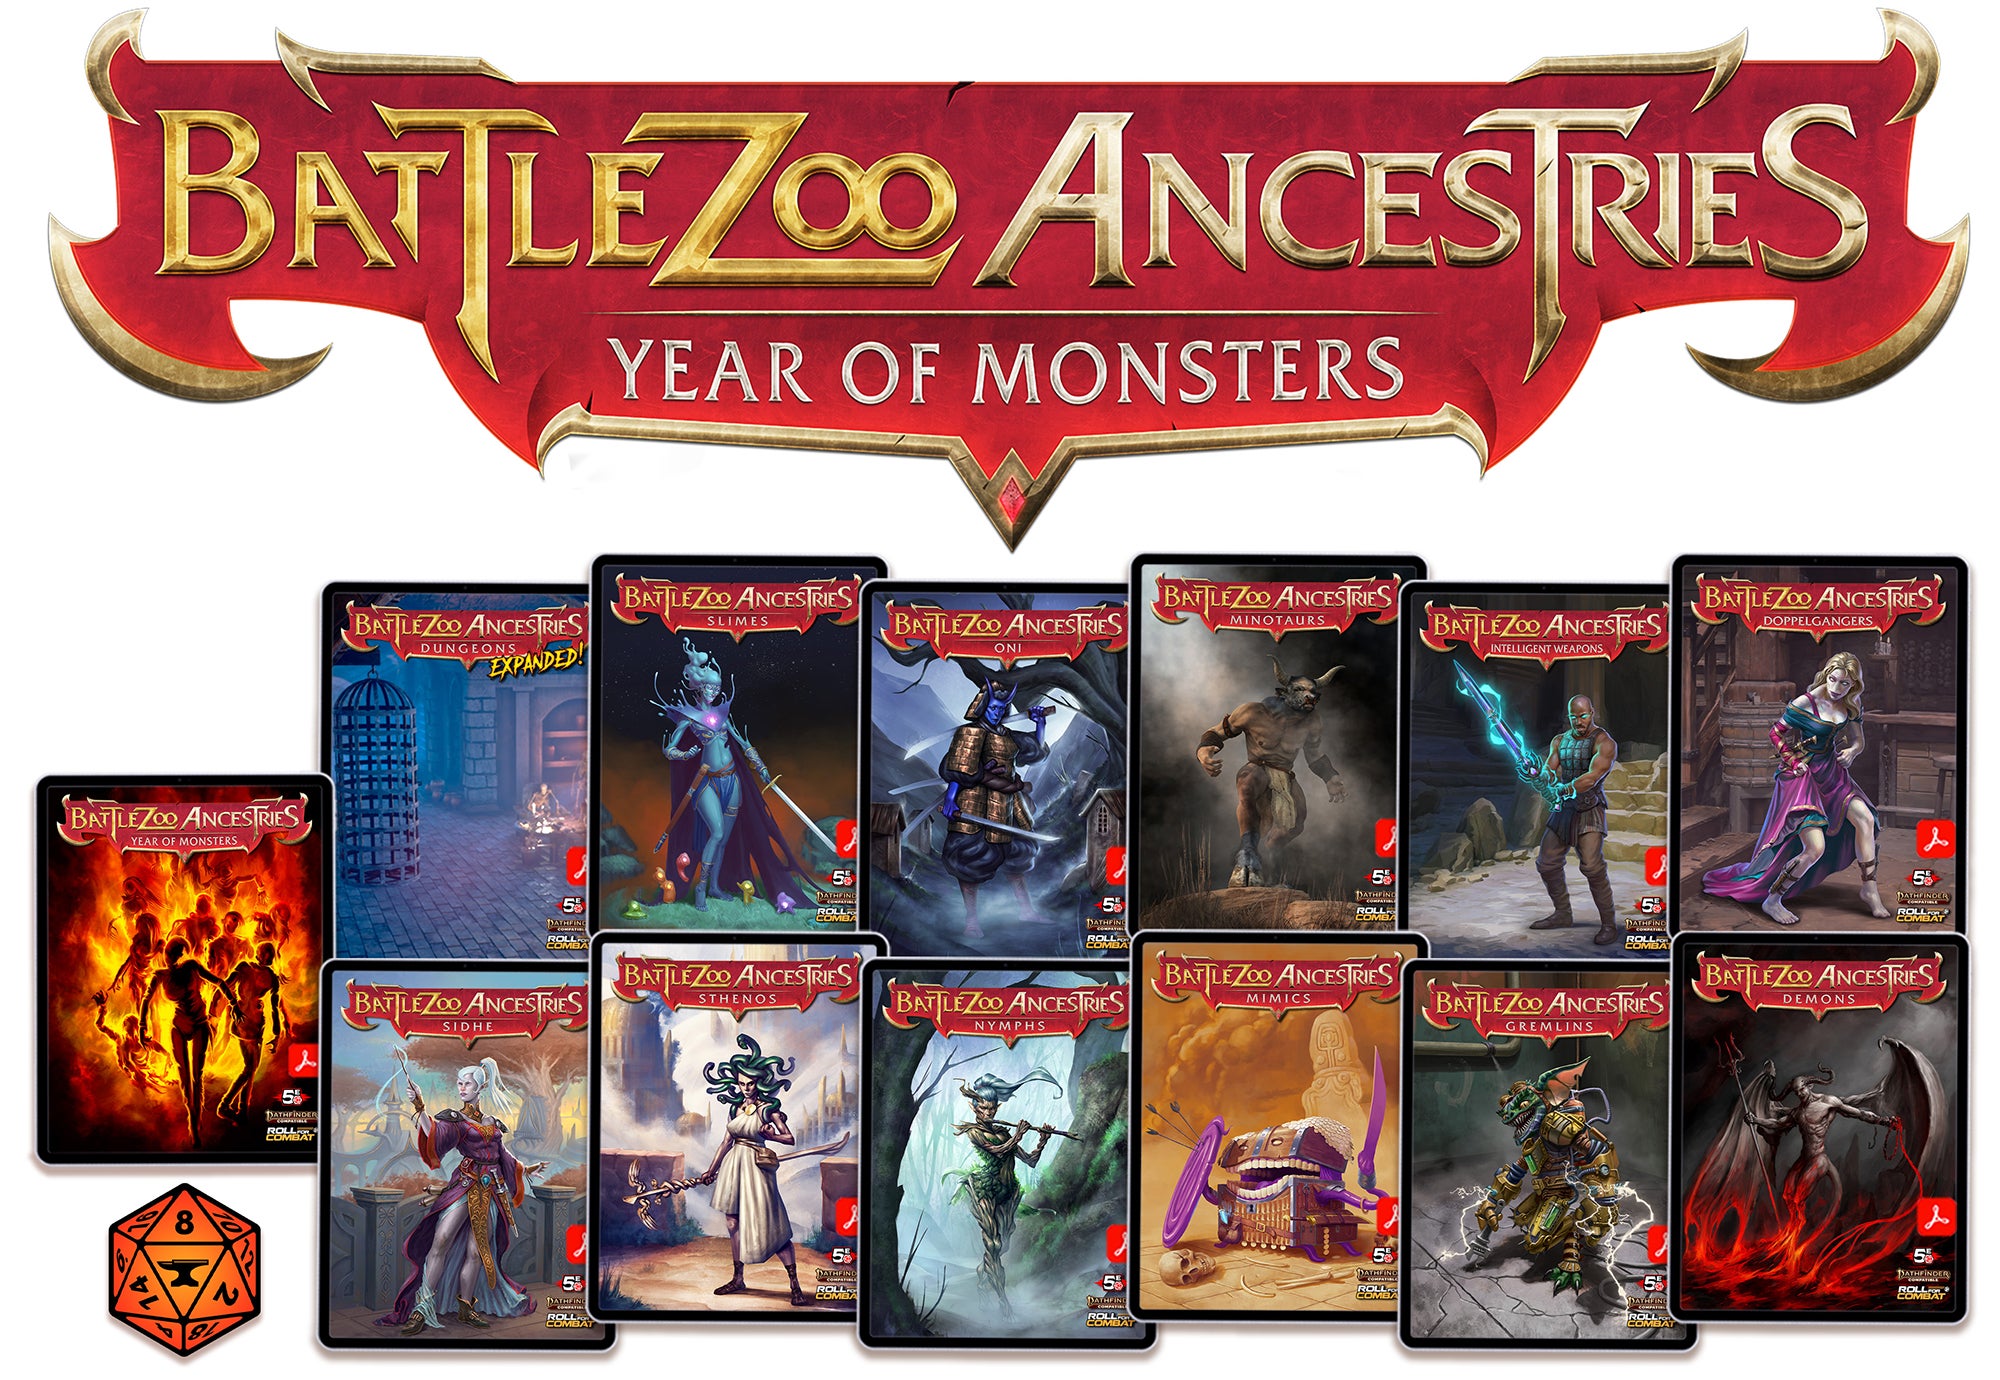 Battlezoo Ancestries: Year of Monsters will allow you to play as a demon, gremlin, intelligent weapon, dungeon, oni, nymph, doppelganger, minotaur, slime, stheno, mimic, and sidhe